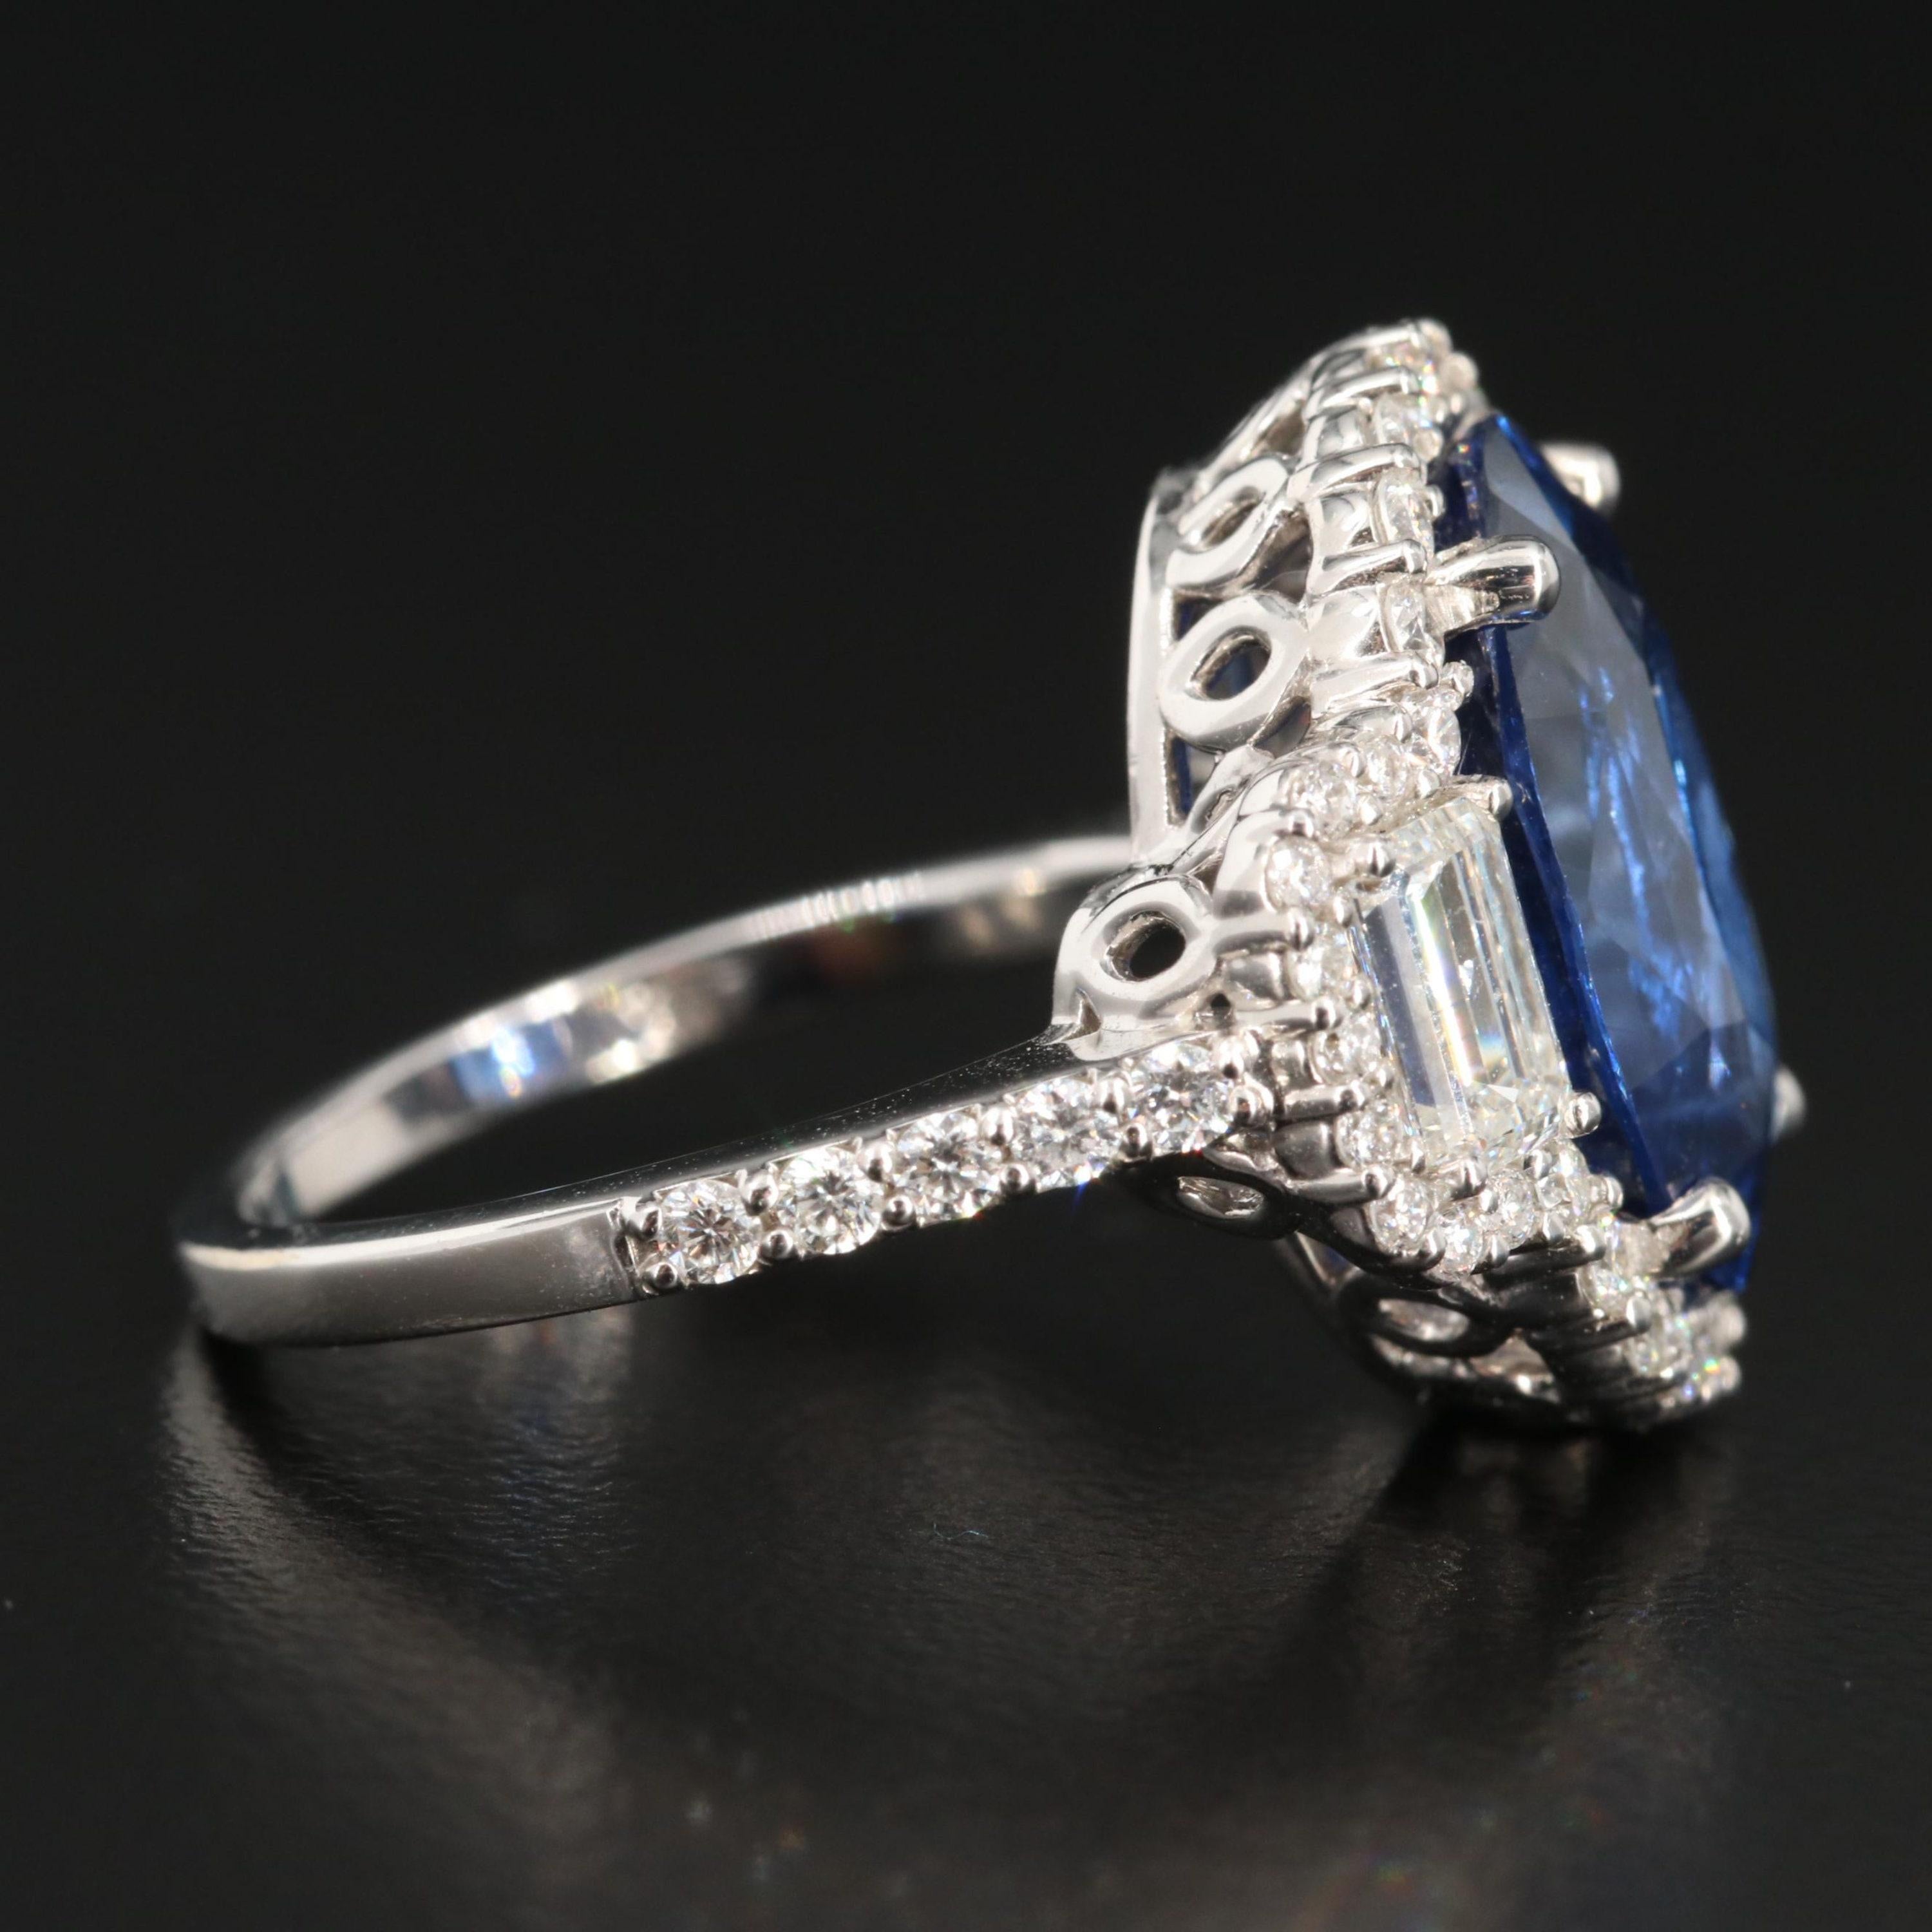 For Sale:  5 Carat Natural Sapphire Diamond Engagement Ring Set in 18K Gold, Cocktail Ring 6